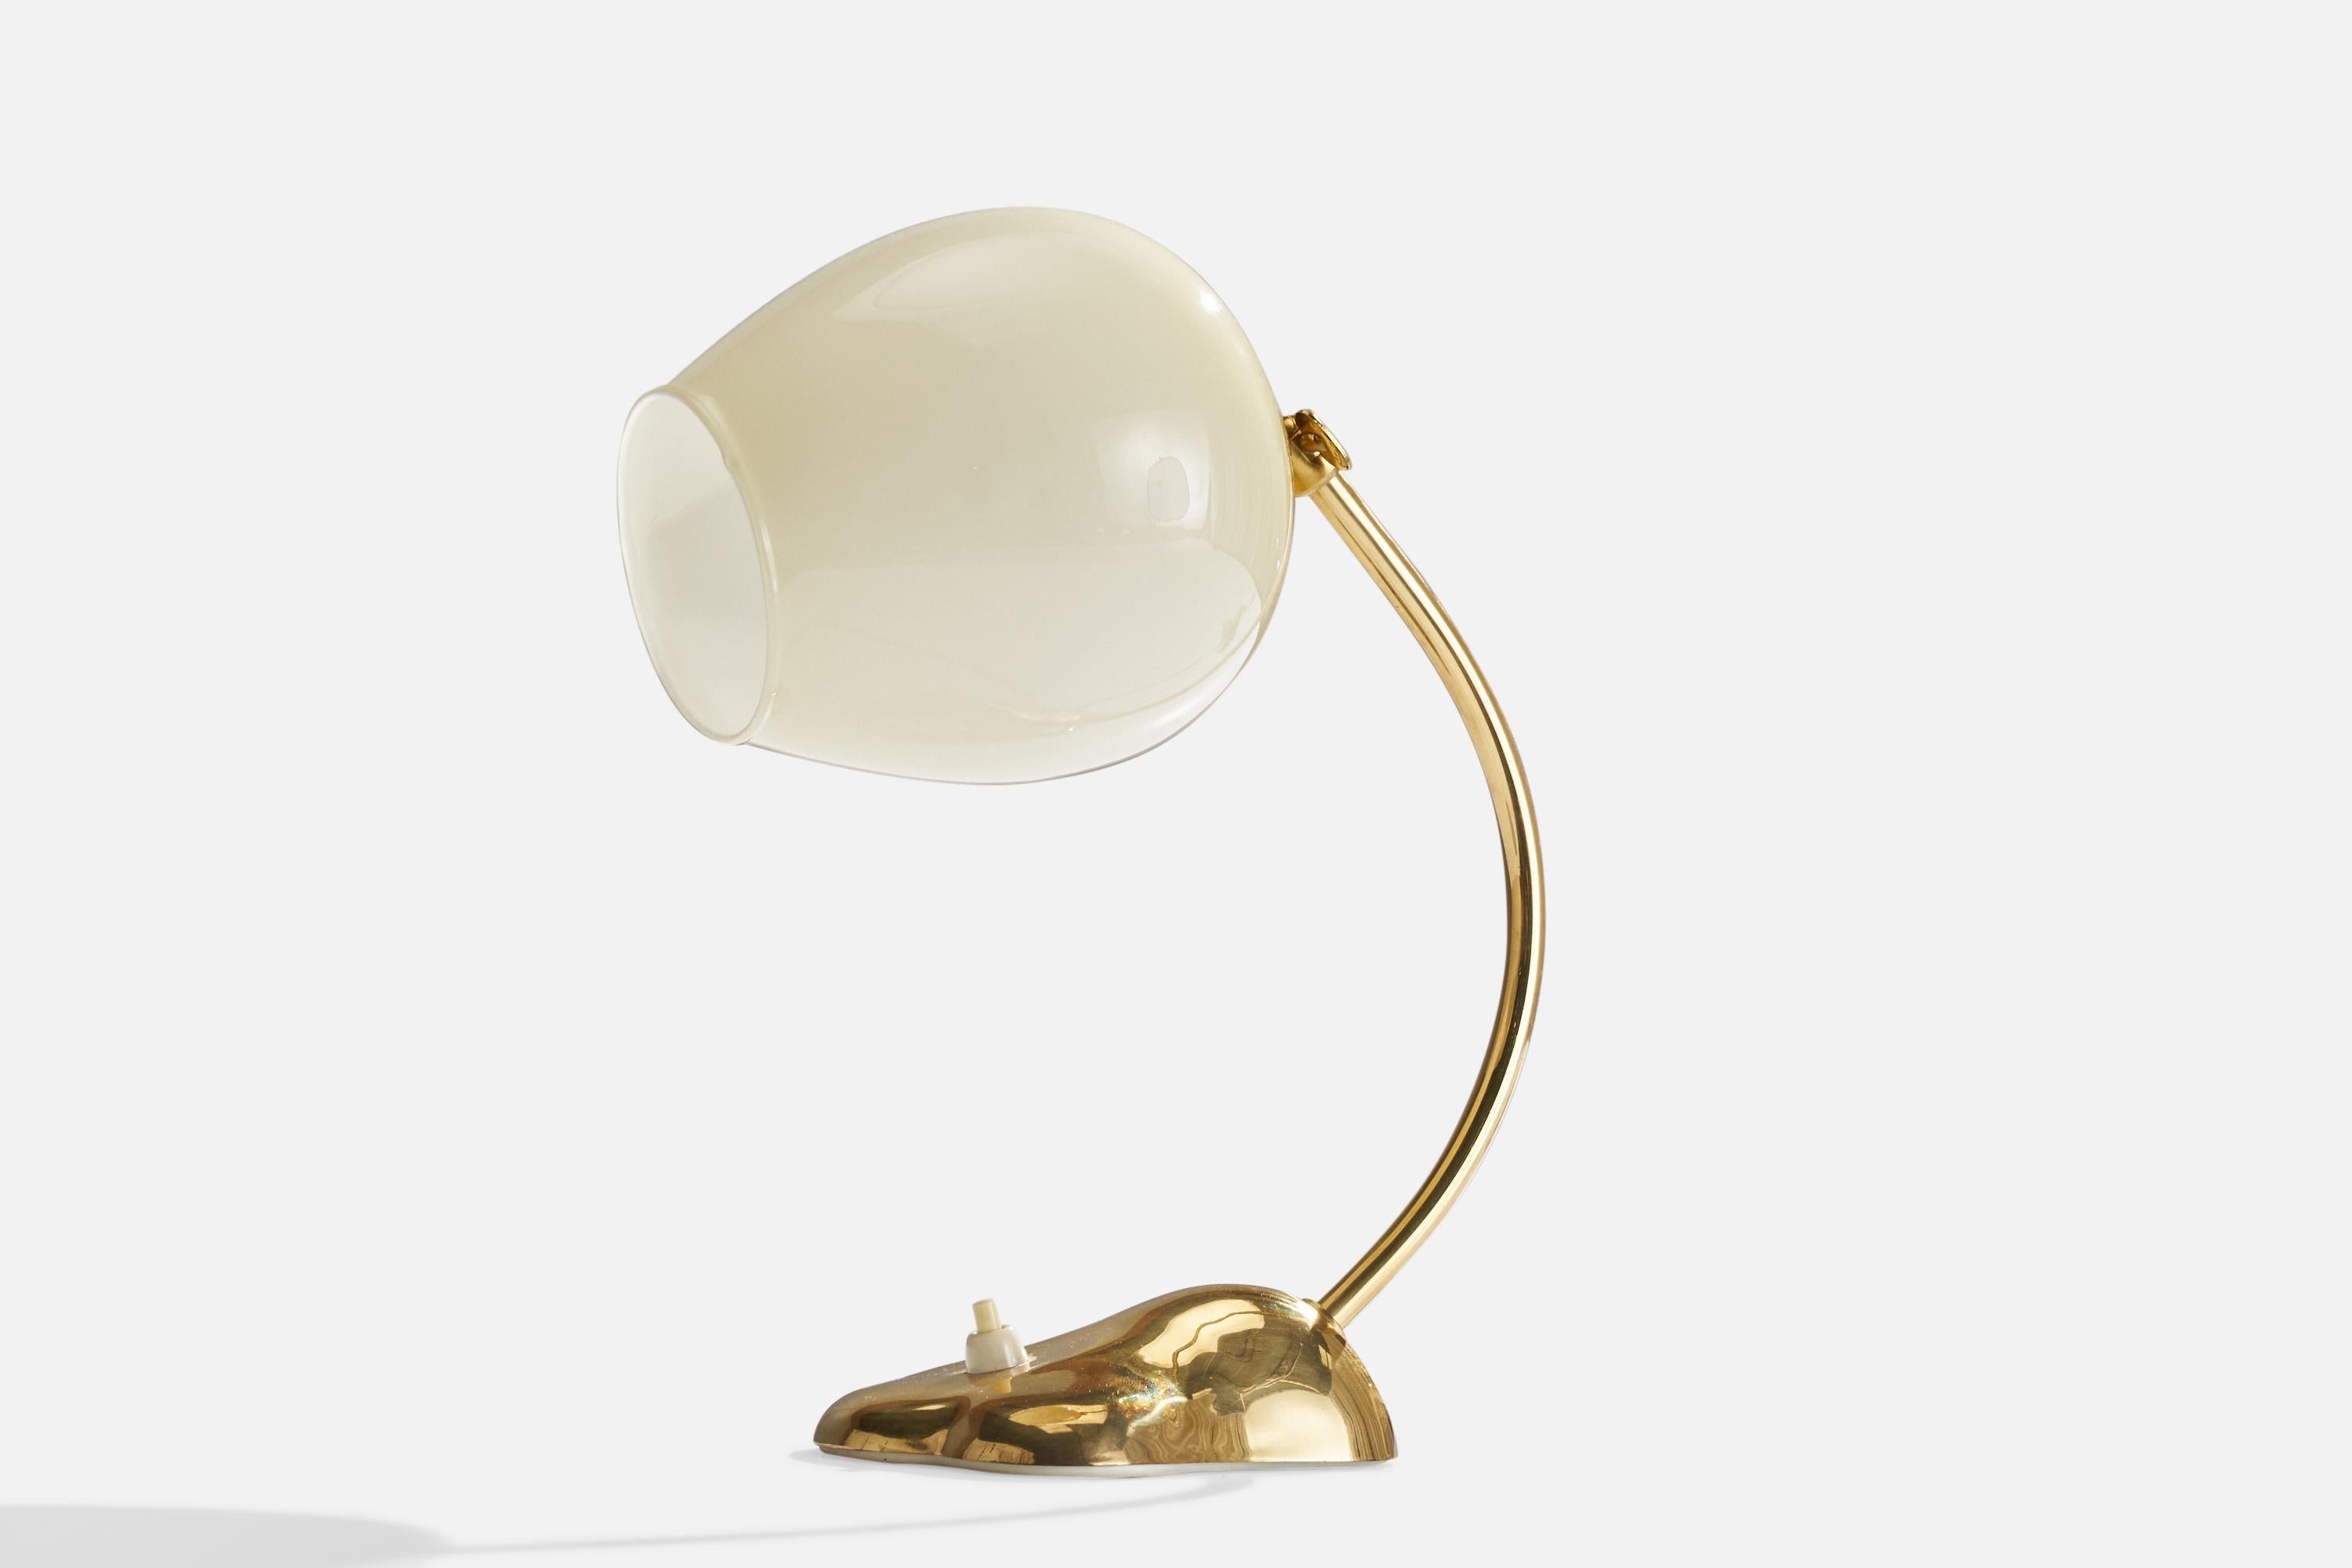 An adjustable brass and opaline glass table lamp designed and produced by Valinte OY, Finland, 1950s.

Overall Dimensions (inches): 11” H x 4.75” W x 9”  D
Stated dimensions include shade.
Bulb Specifications: E-26 Bulb
Number of Sockets: 1
All